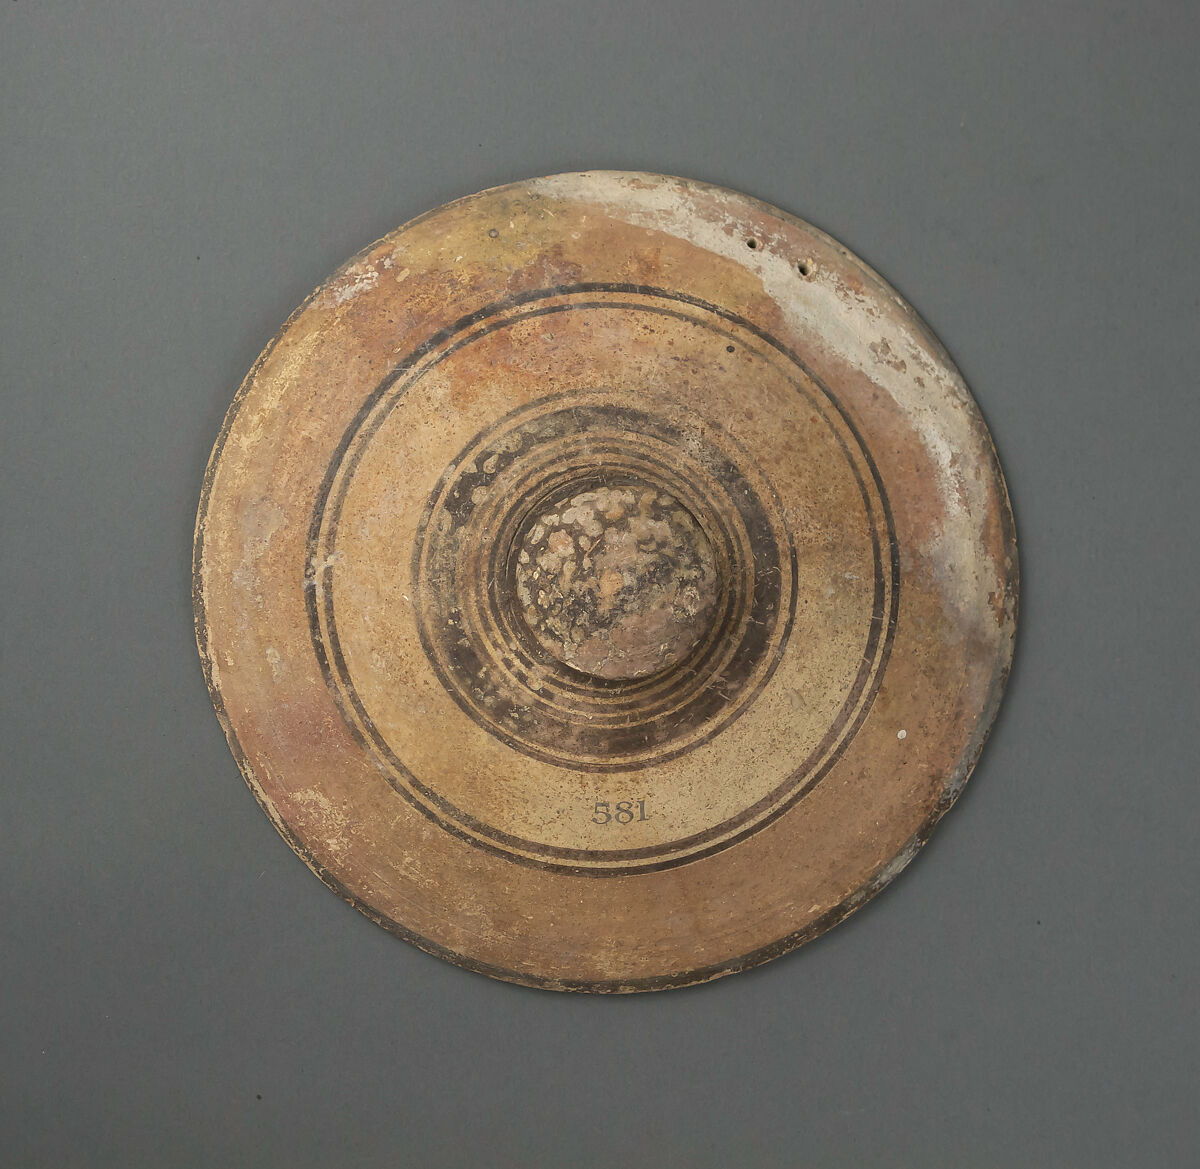 Lid of a bowl with knob, Terracotta, Cypriot 